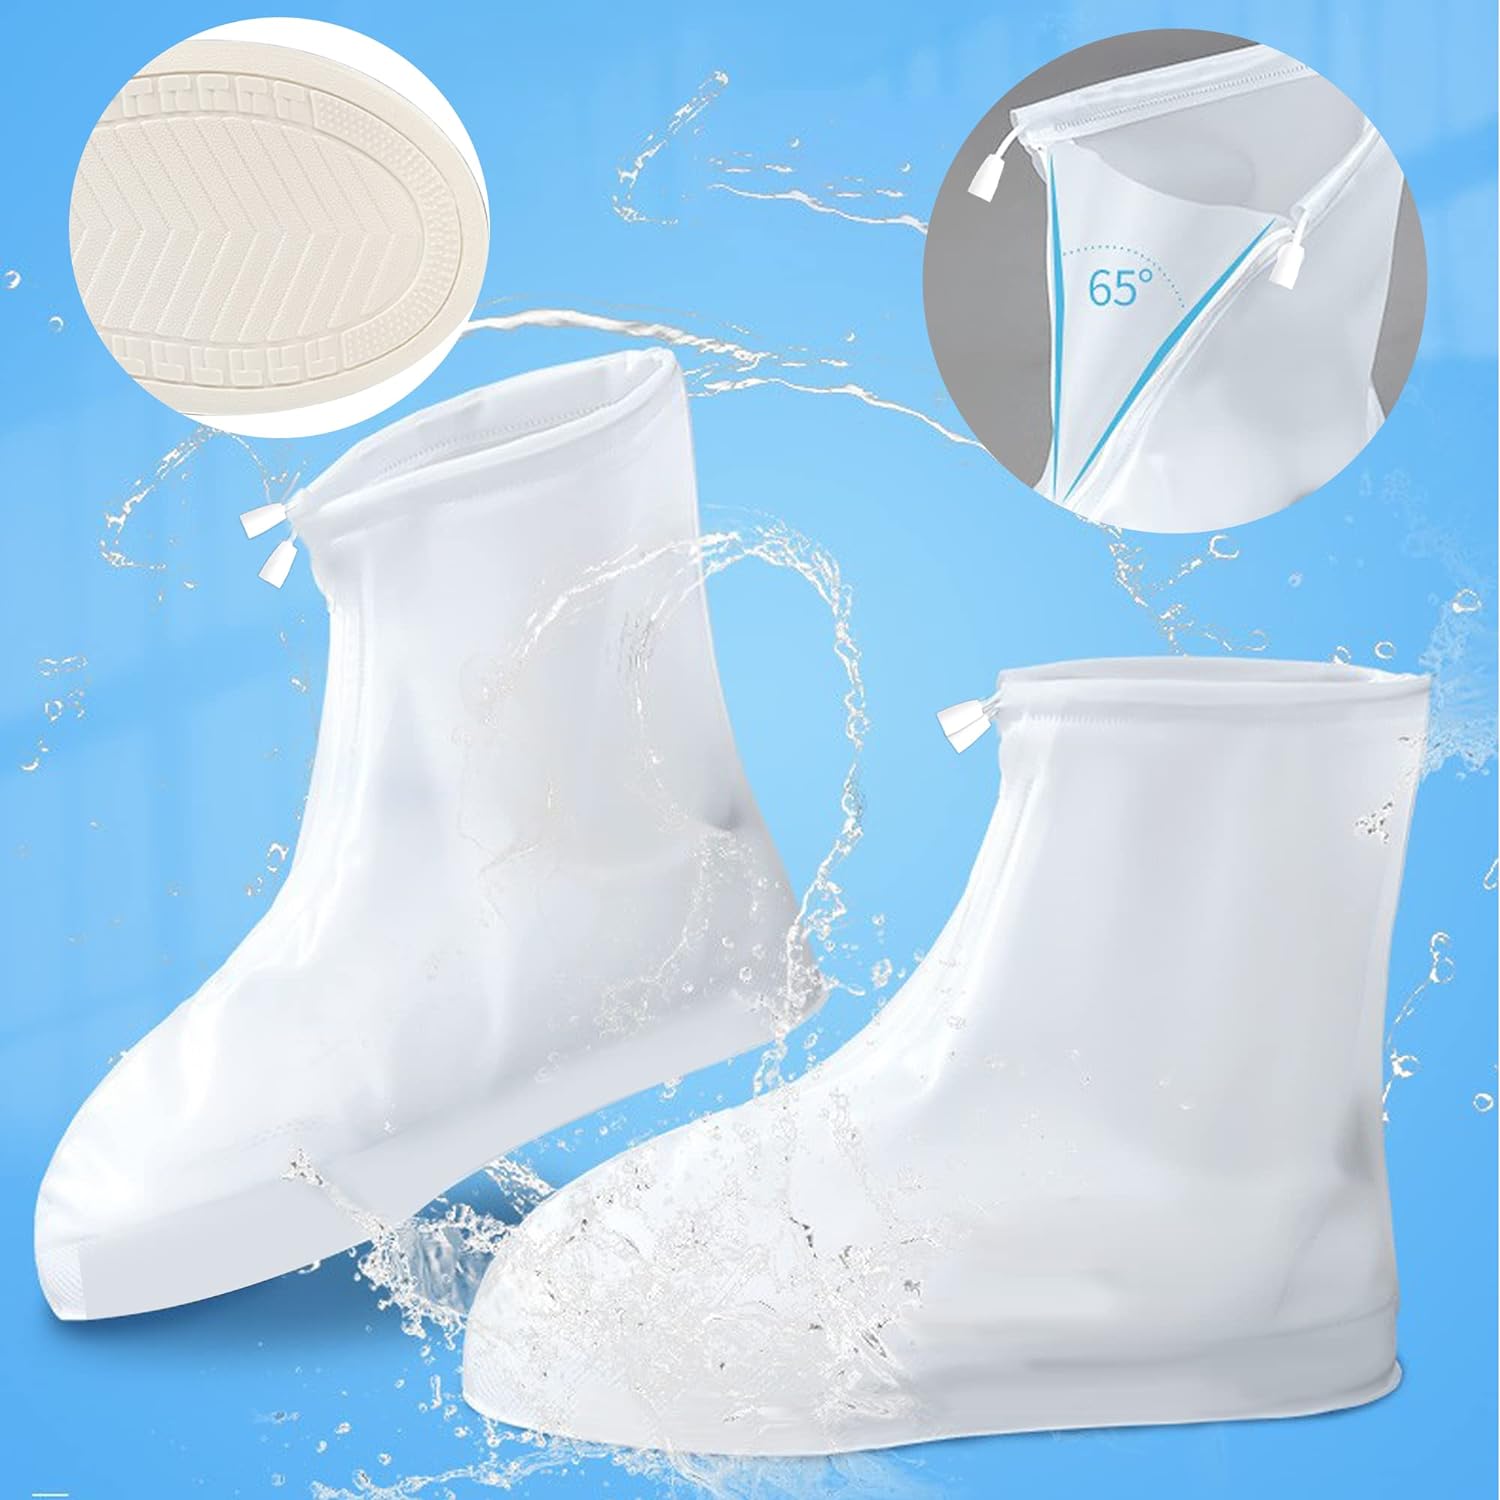 Soogree Rain Boot Waterproof Shoes Covers, Sand Control Non-Slip Shoe Cover Galoshes, PVC Rubber Sole Reusable Rain Snow Boots Overshoe